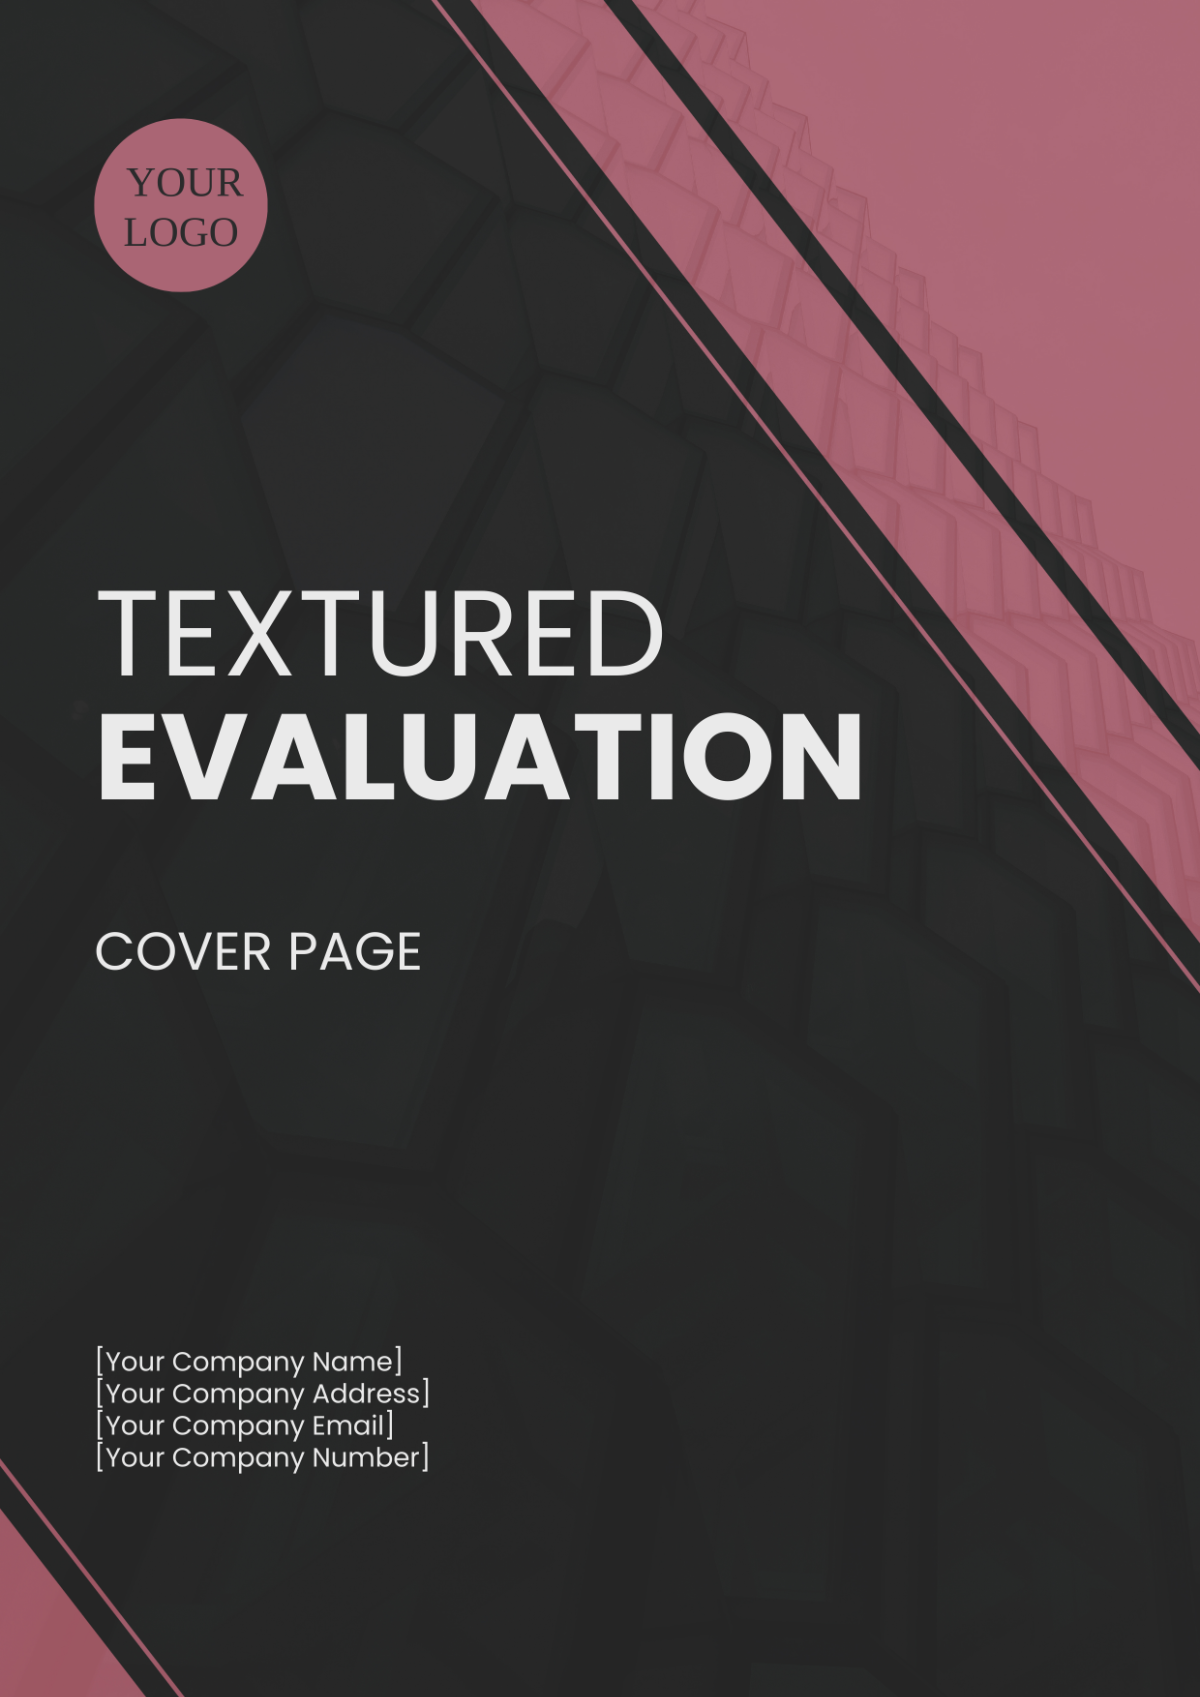 Textured Evaluation Cover Page